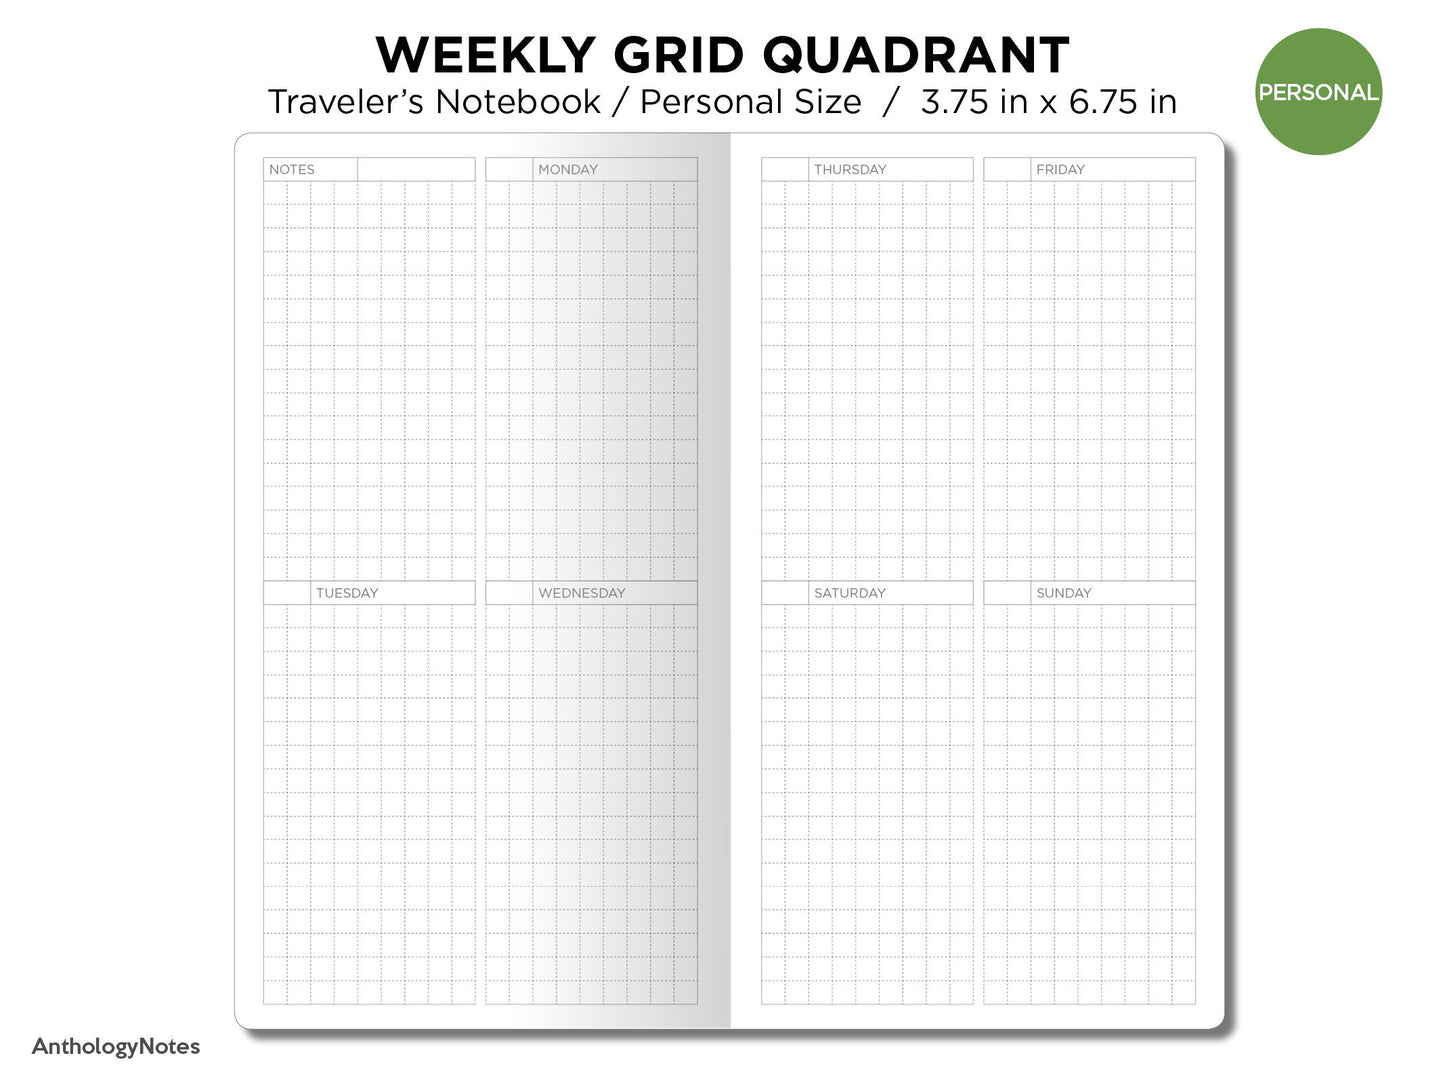 TN PERSONAL Weekly GRID Quadrant Traveler's Notebook Printable Insert - Wo2P